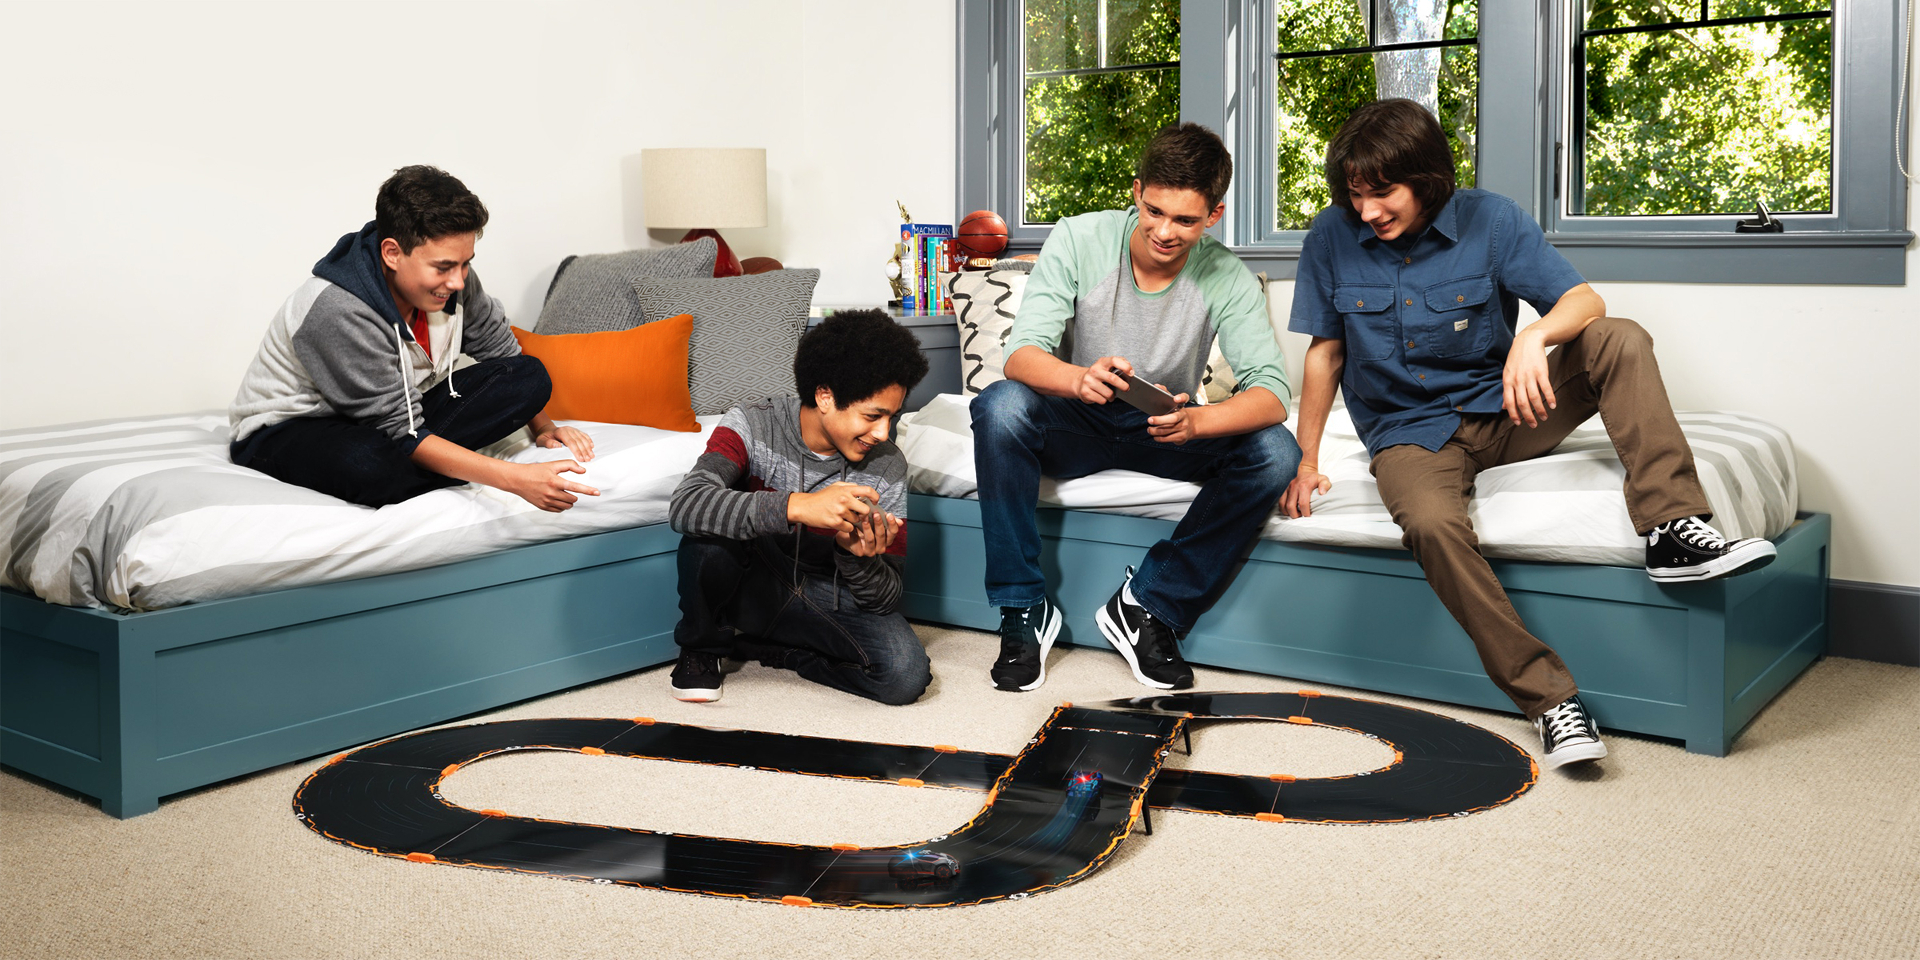 Anki Overdrive IOS or Android controllable Race Track Car Set